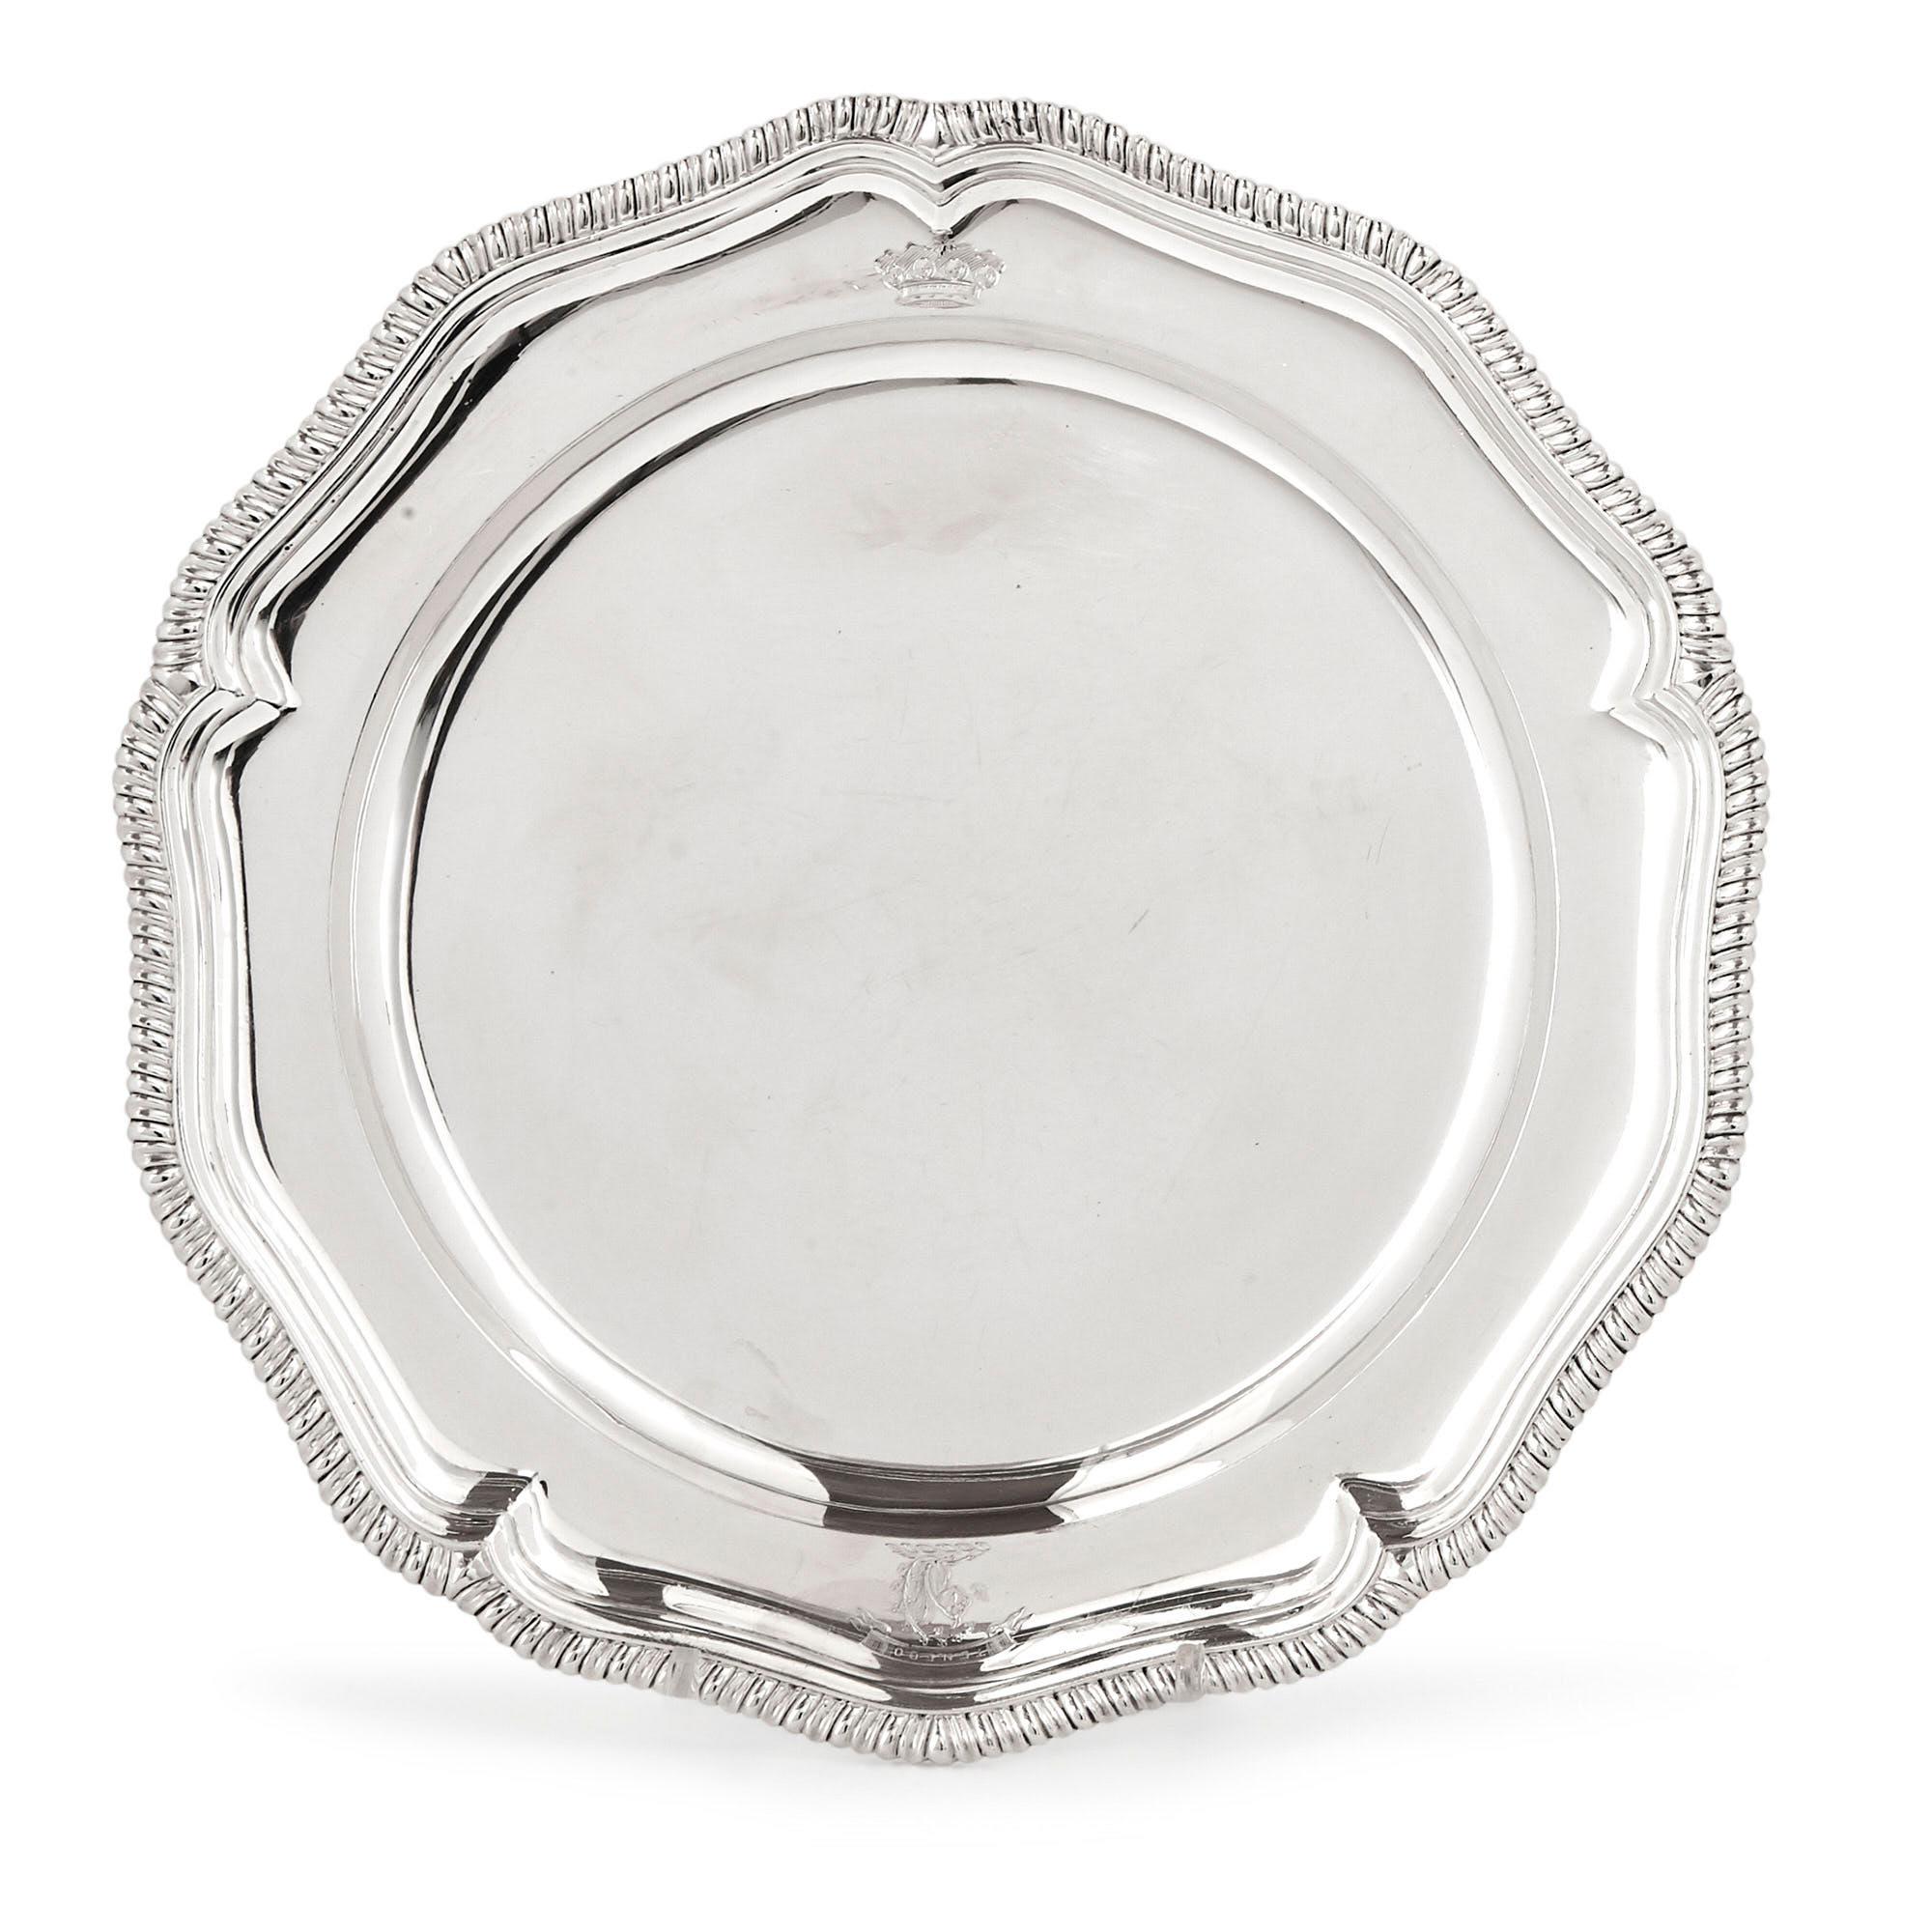 Manufactured in 1782 by the accomplished English silversmith Charles Wright, this set of twelve silver dinner plates is of superb quality. Each plate is largely circular, though the profile of each plate is actually polygonal, featuring five pinched